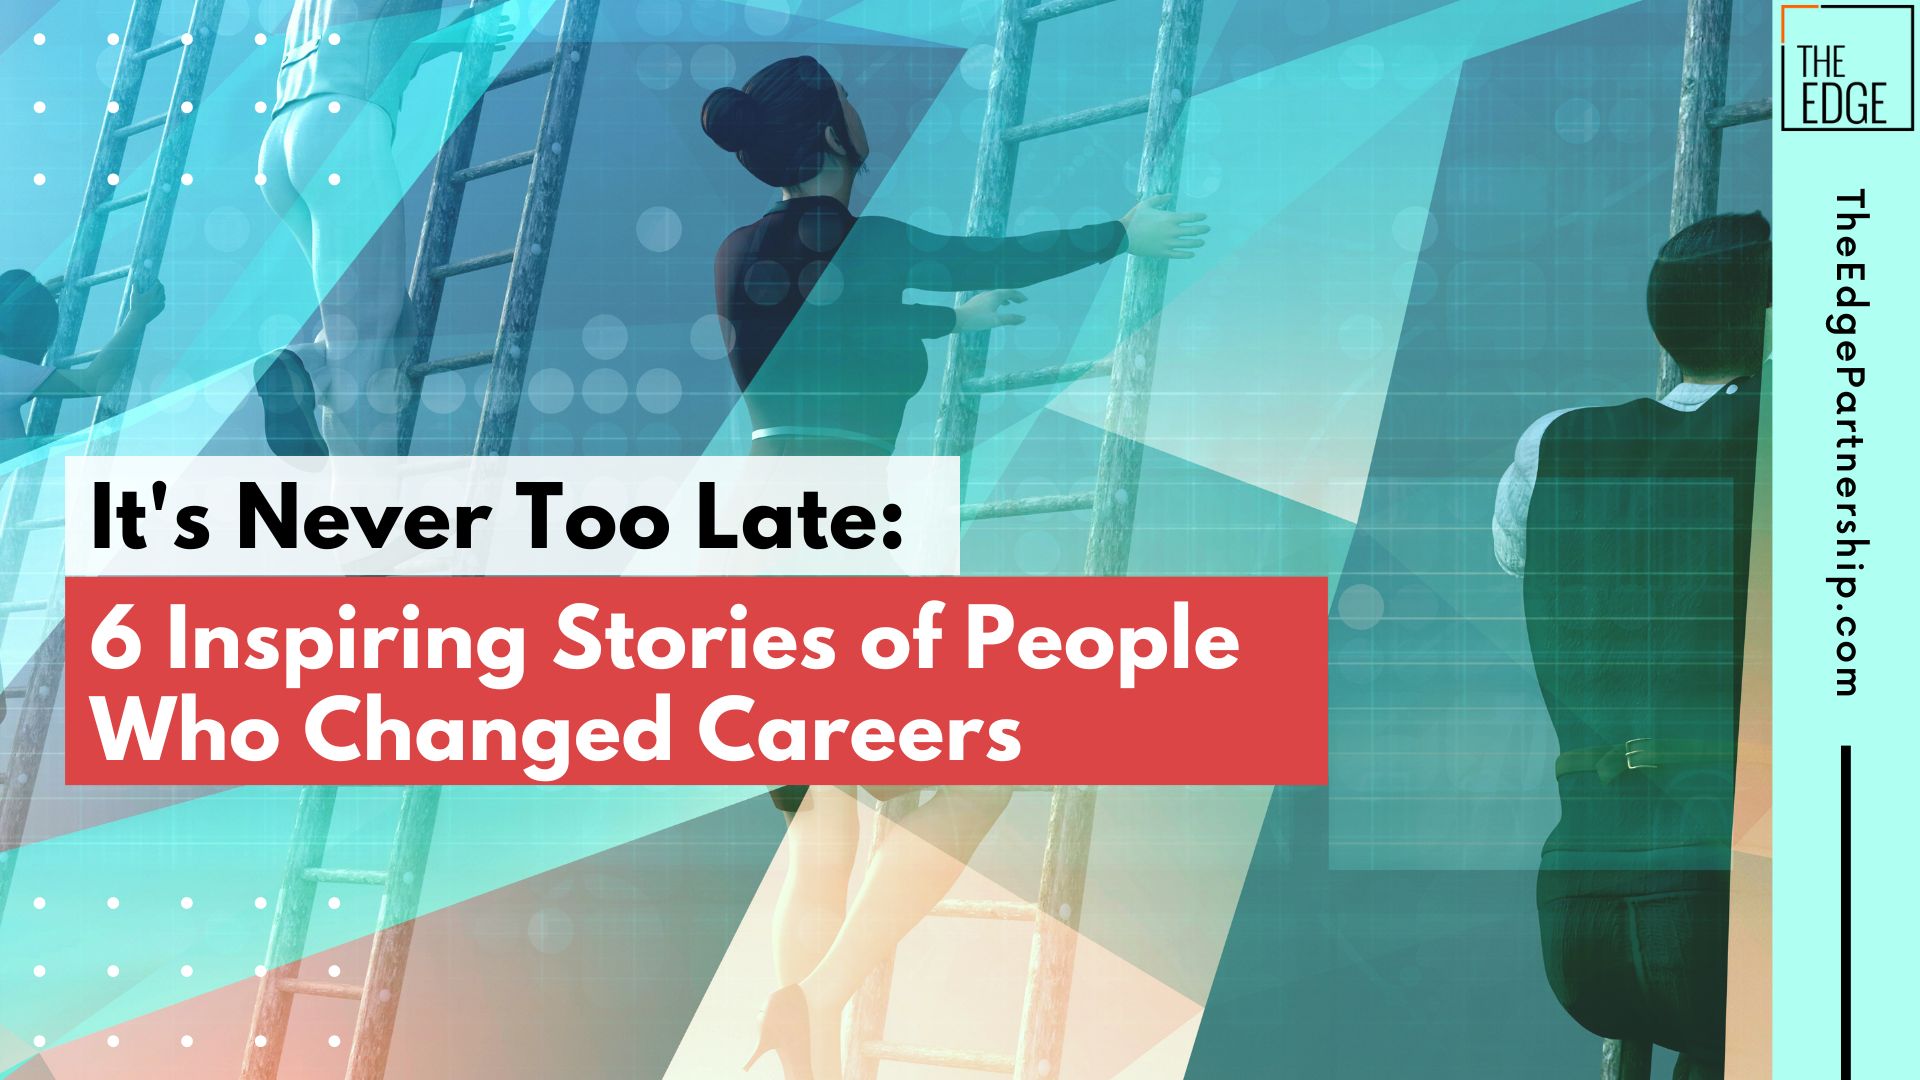 It’s Never Too Late: 6 Inspiring Stories of People Who Changed Careers